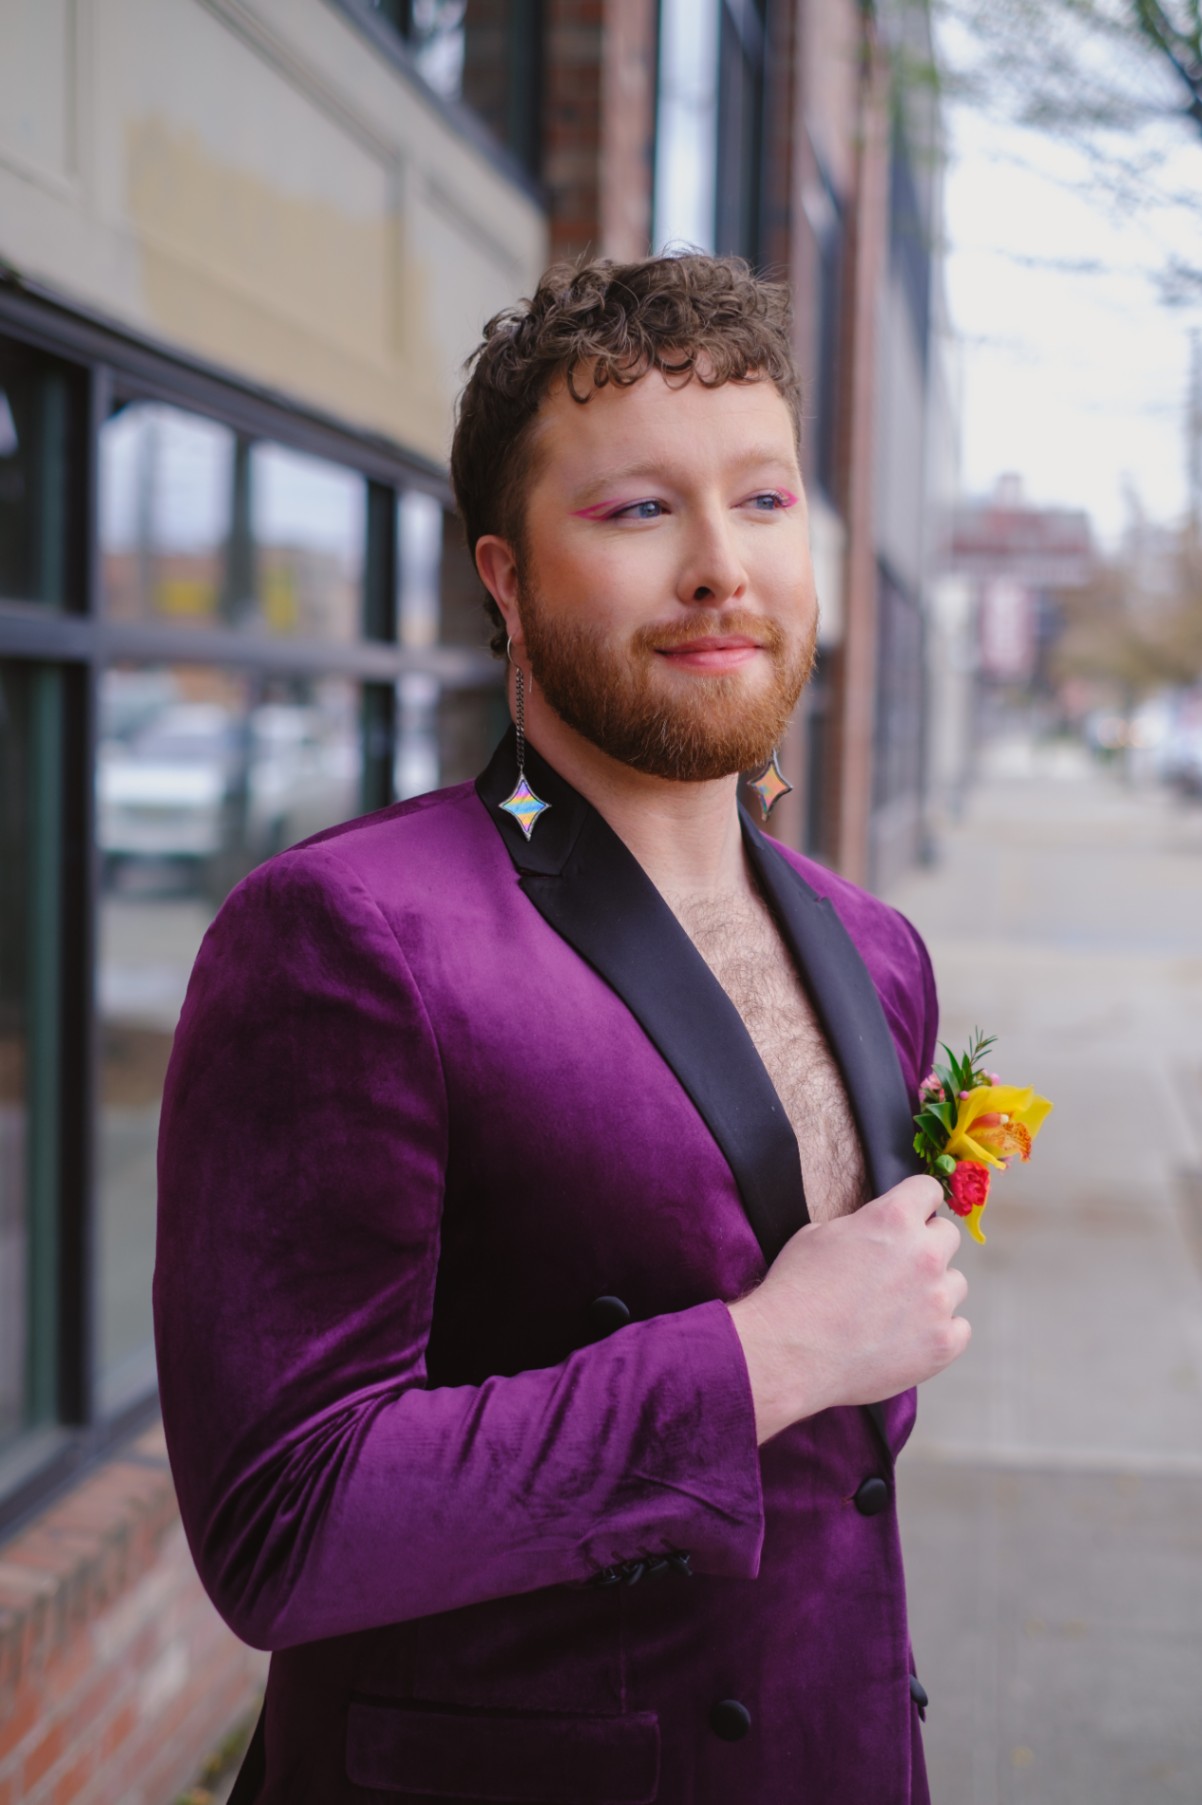 Nonbinary marrier with curly brown hair, a reddish-brown beard and hot pink eye liner gazes into the distance. They're wearing diamond drop earrings and wearing a velour purple tuxedo jacket with no shirt, showing off some chest hair.